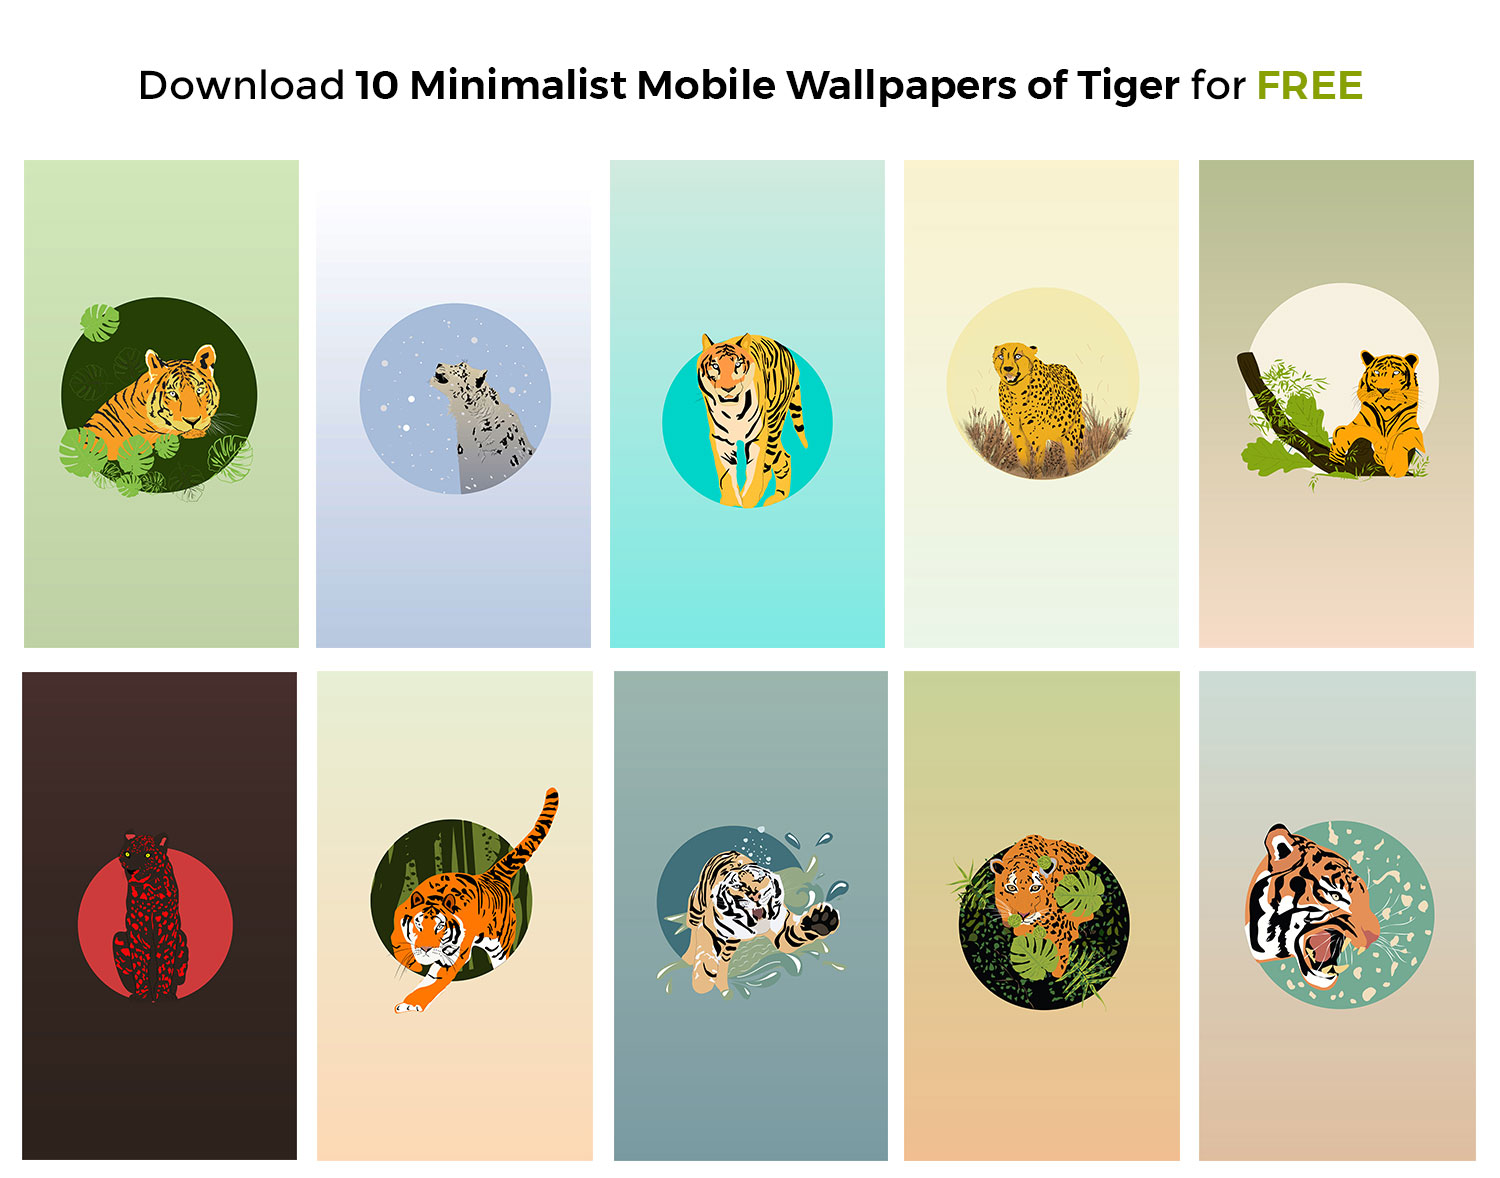 Download 10 Minimalist Mobile Wallpapers of Tiger for FREE